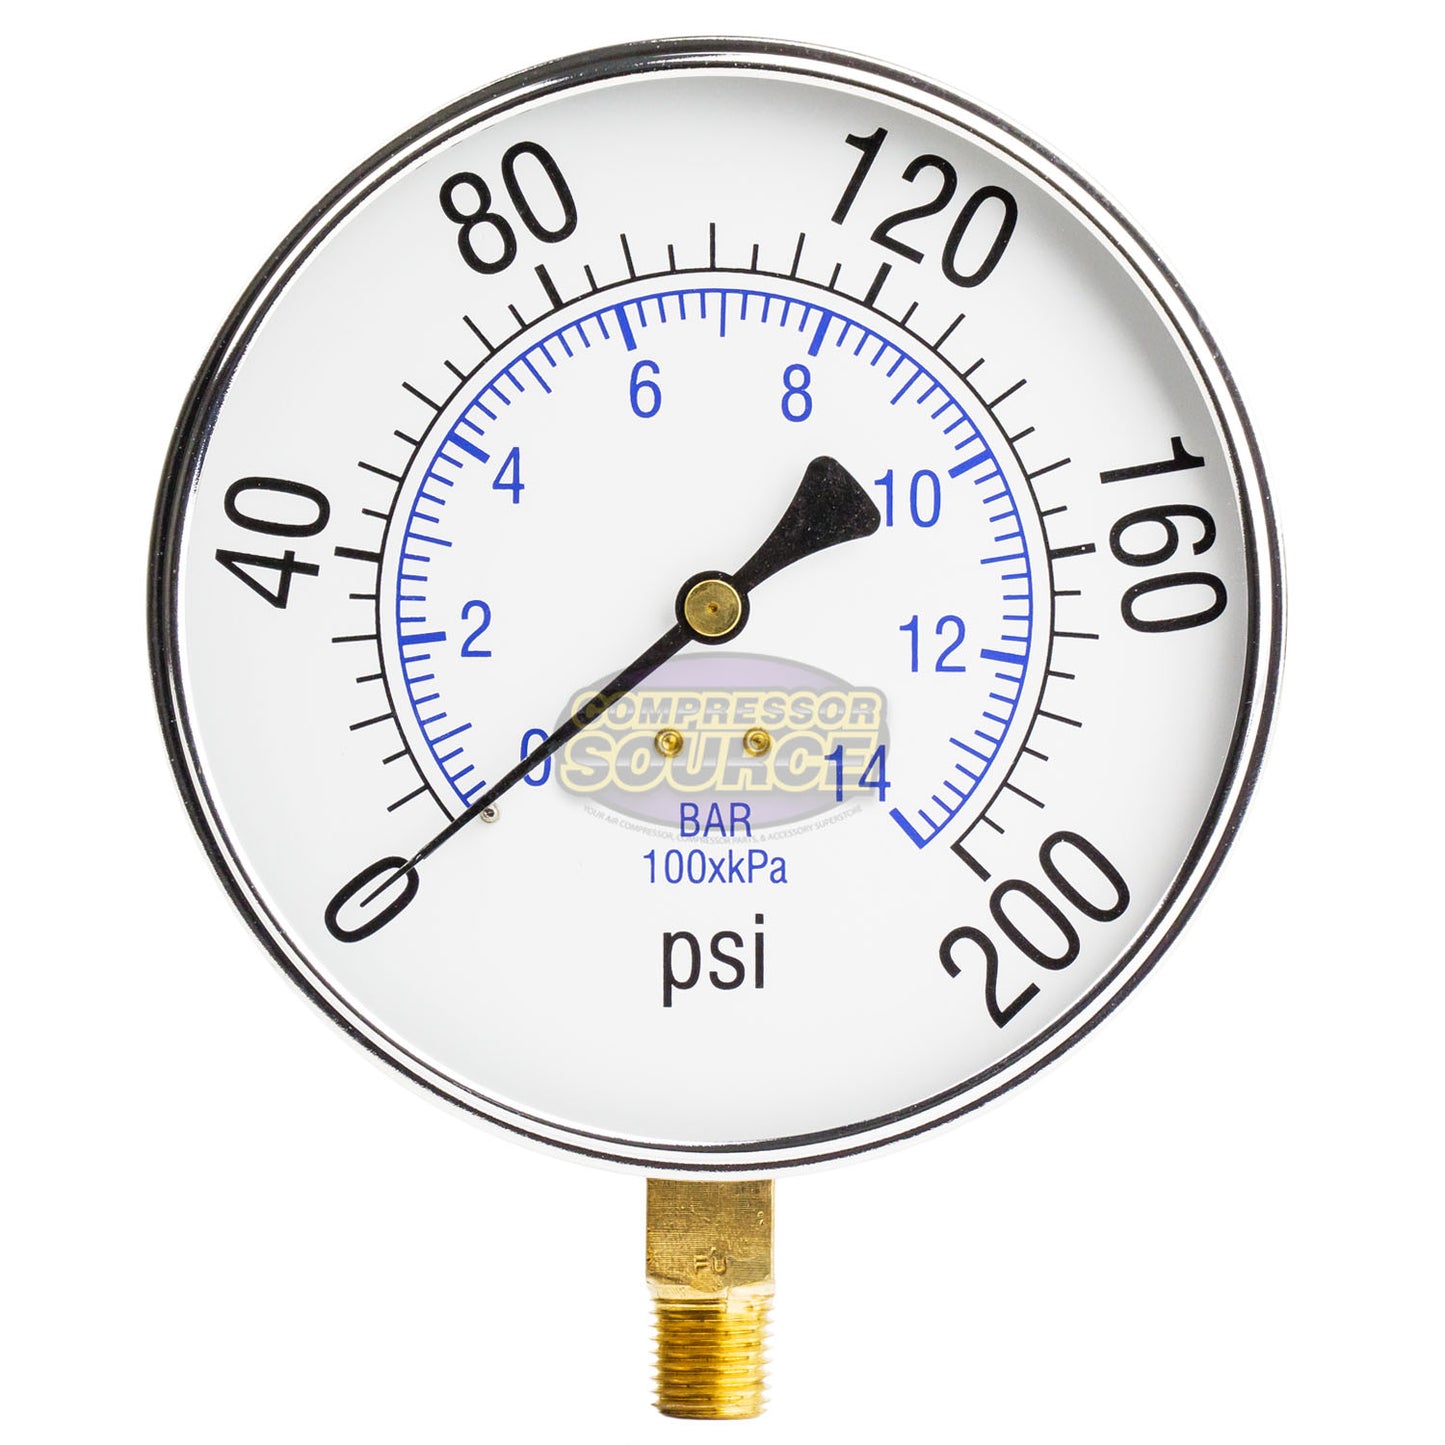 1/4" NPT 0-200 PSI Air Pressure Gauge Lower Side Mount With 4.5" Face